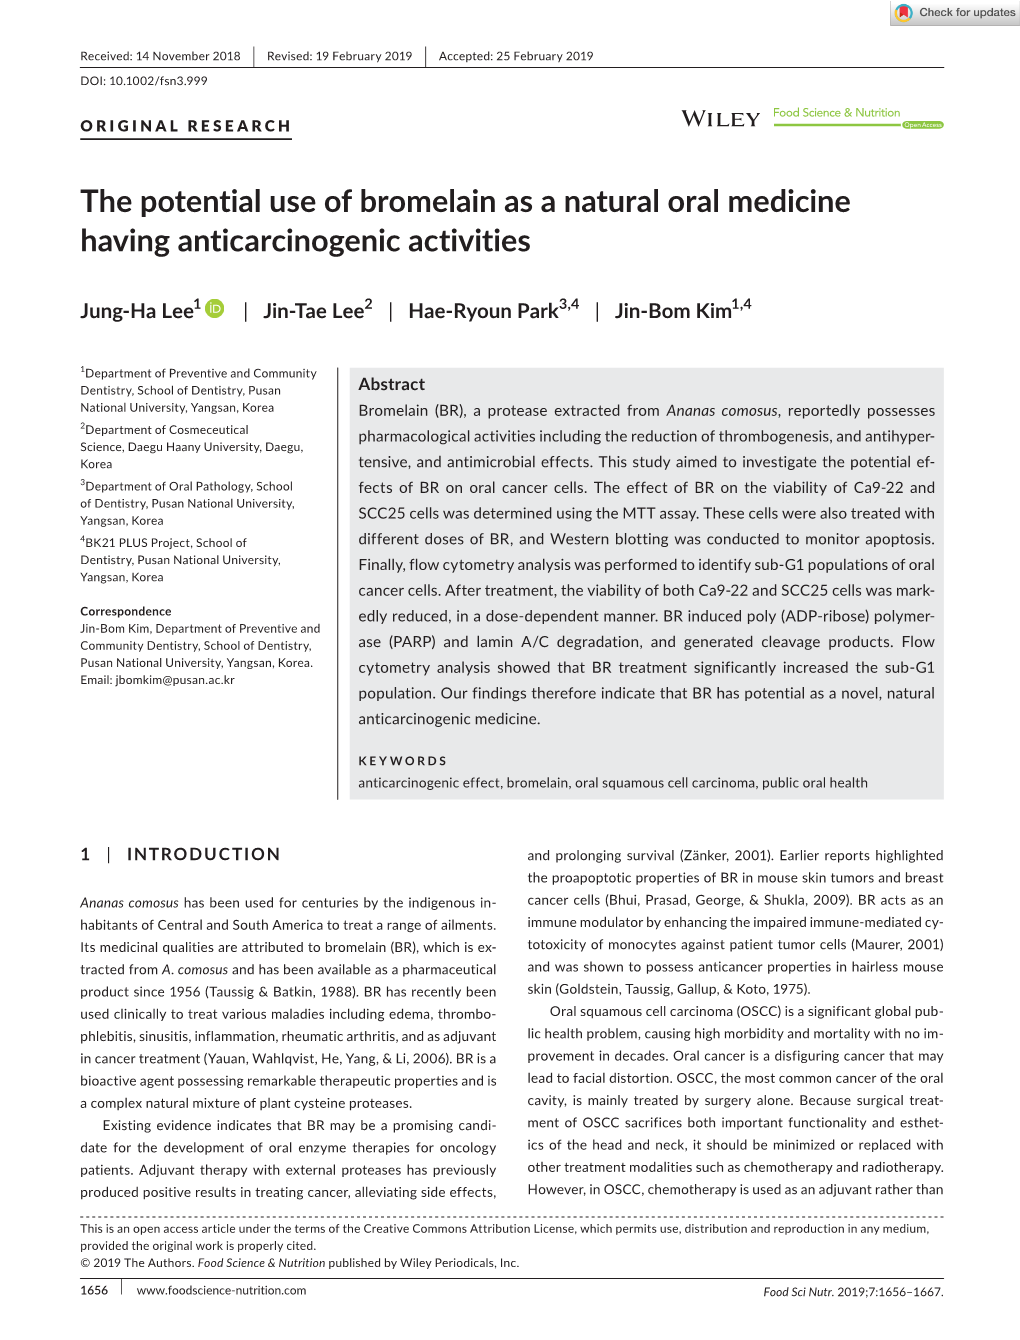 The Potential Use of Bromelain As a Natural Oral Medicine Having Anticarcinogenic Activities